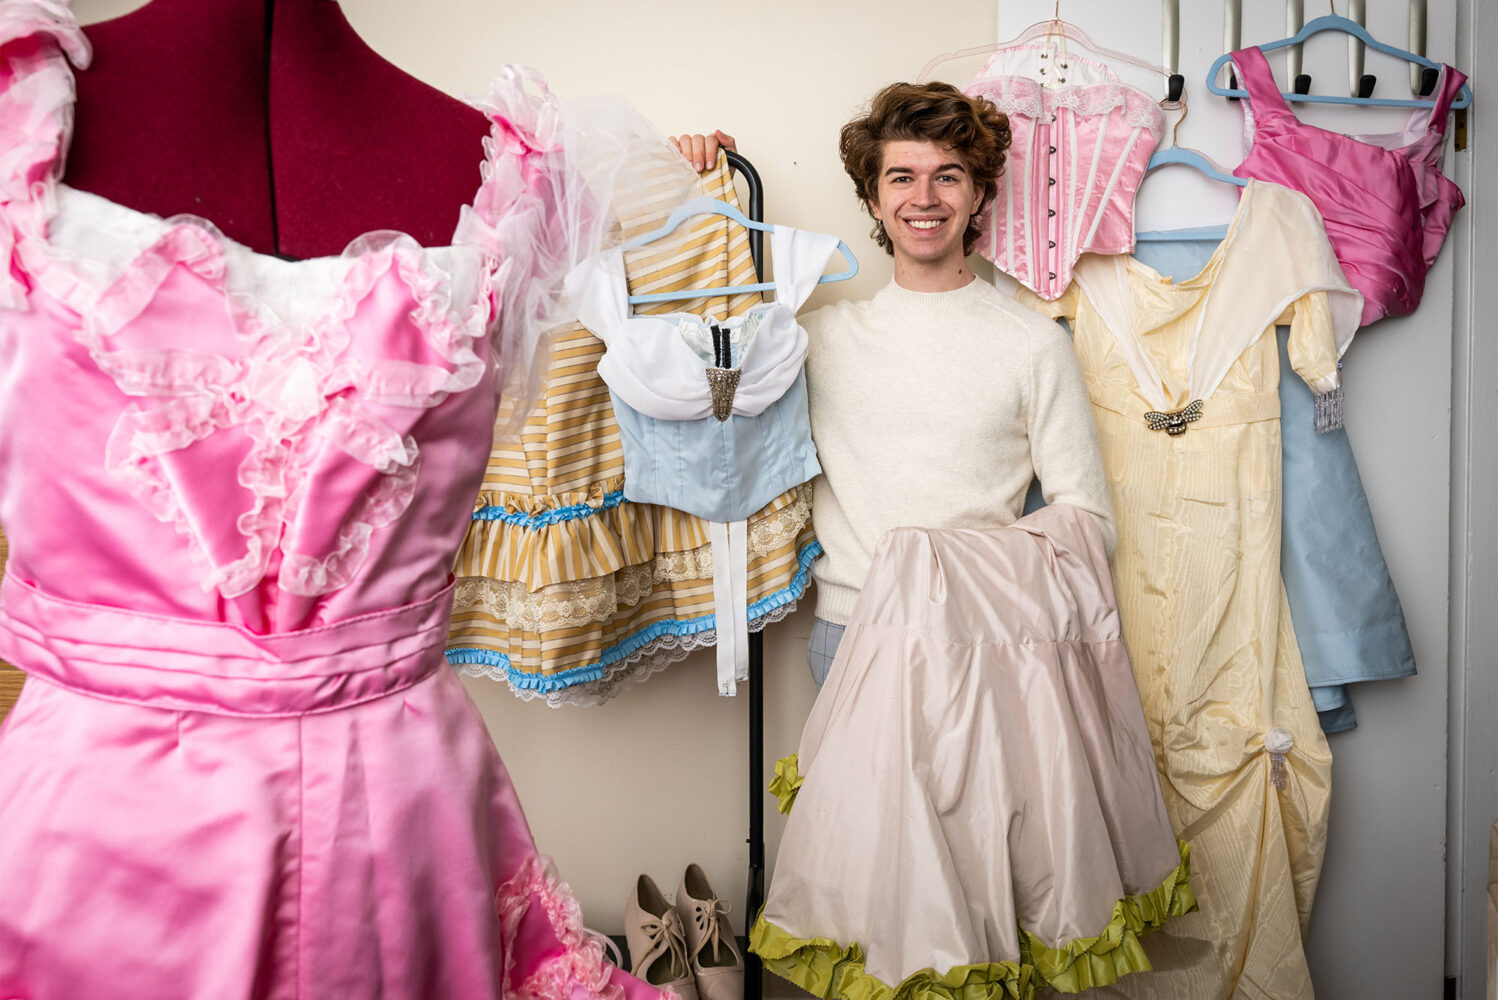 Photo: Shaw Hutton (CGS'23, CAS'25), an architectural studies major, spends his spare time making reproductions of 19th and early 20th century women's fashions. Photo by Cydney Scott for Boston University Photography